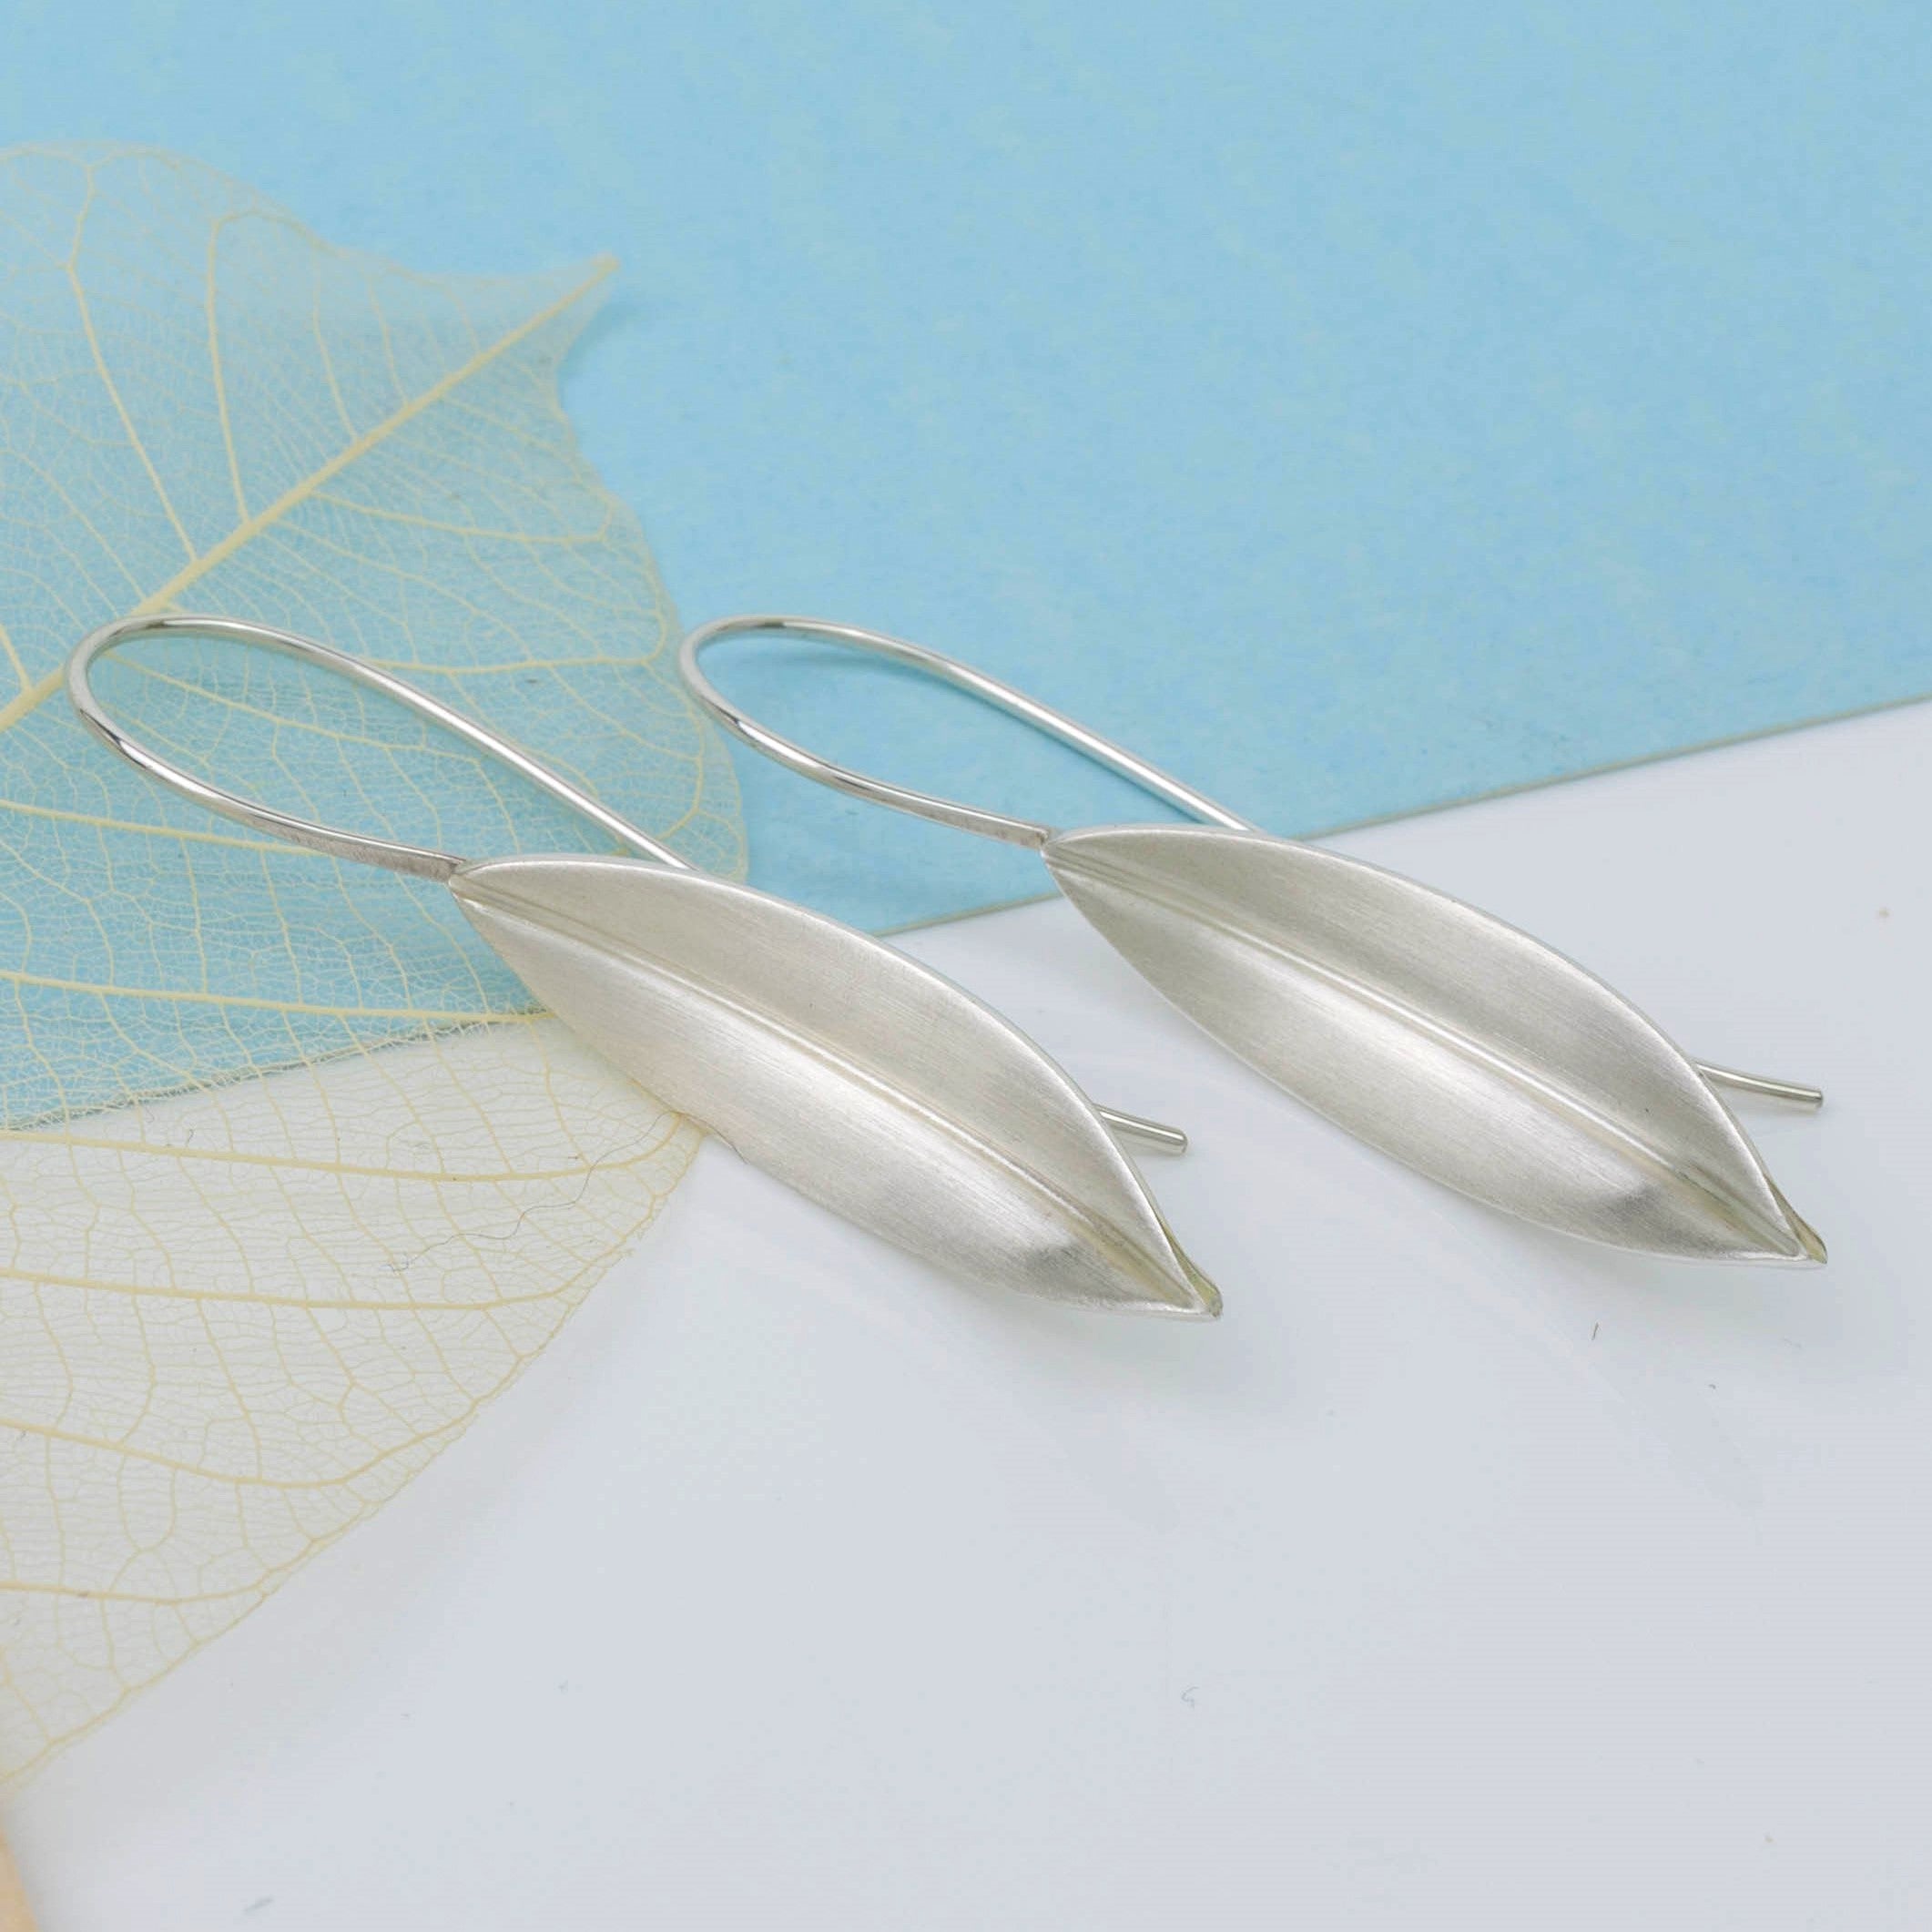 Brushed Silver Willow Leaf Drop Earrings